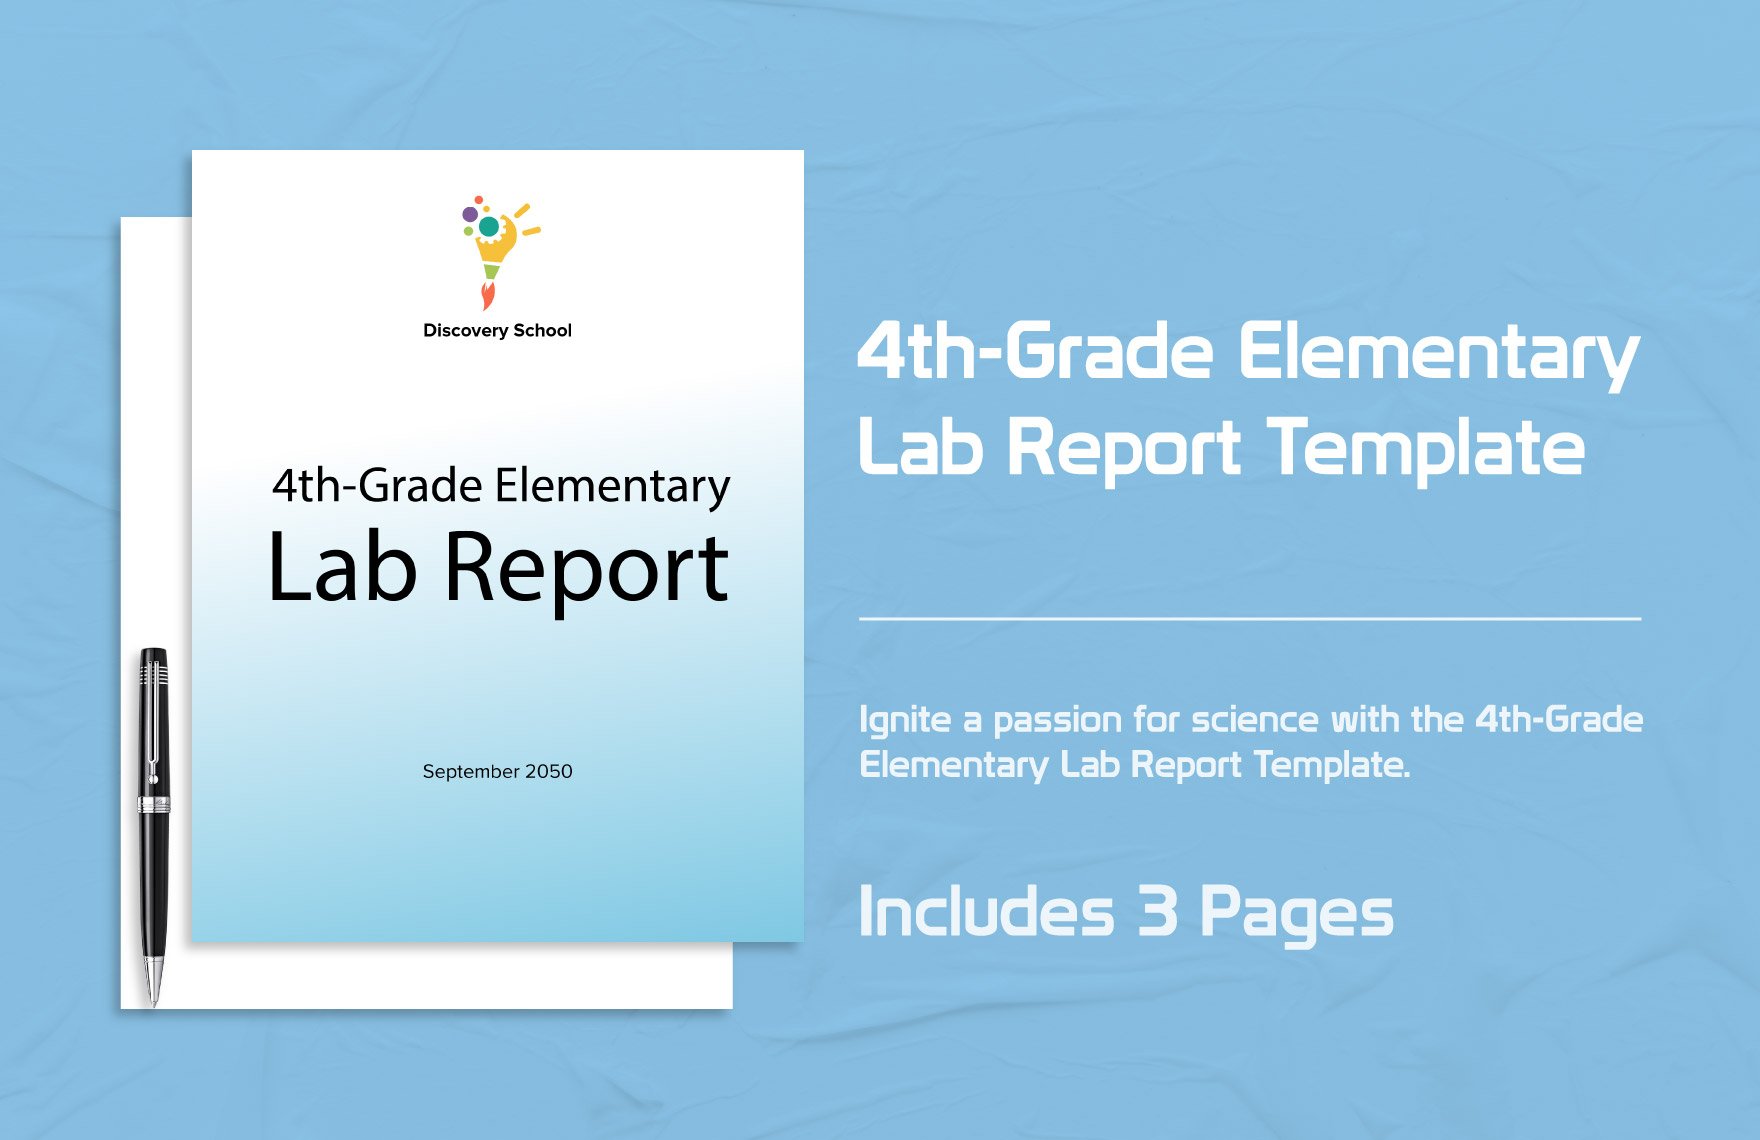 4th-Grade Elementary Lab Report Template in Word, Google Docs, PDF